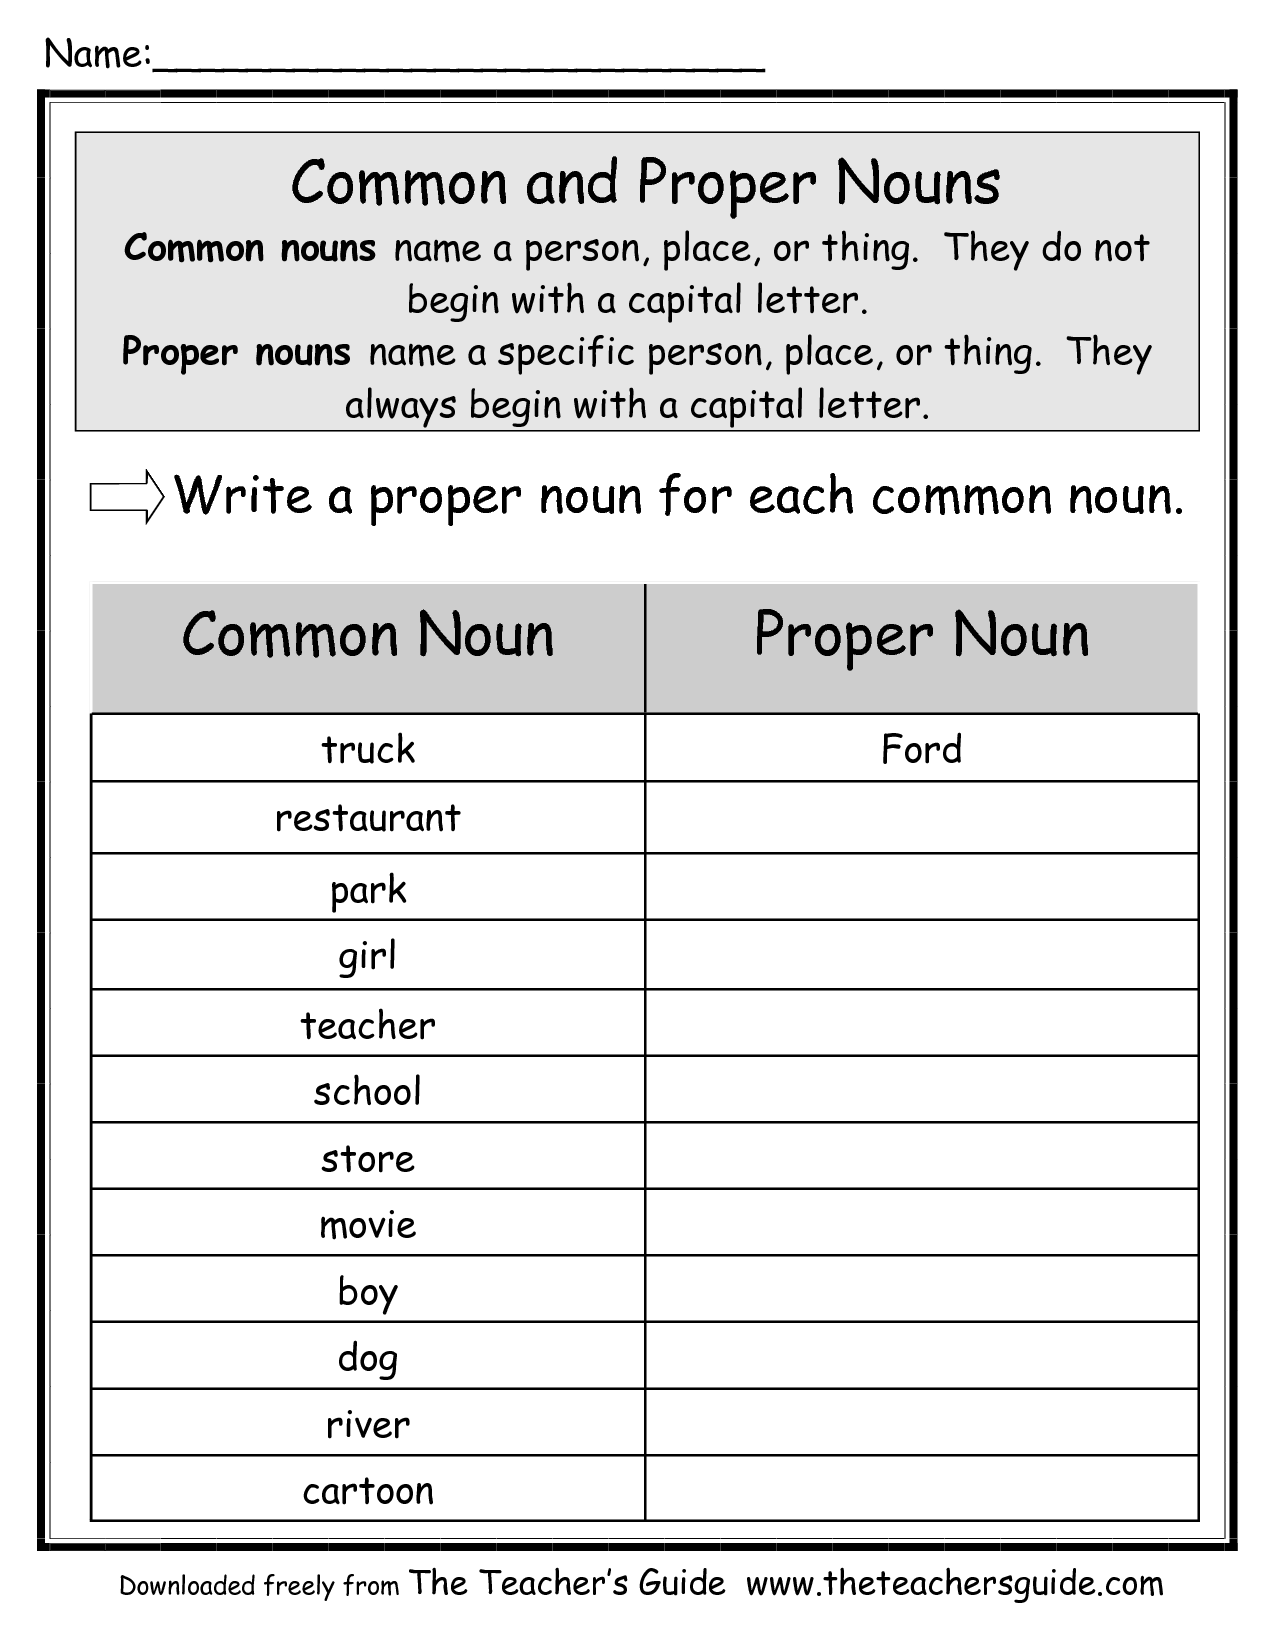 13-best-images-of-common-and-proper-nouns-worksheets-common-and